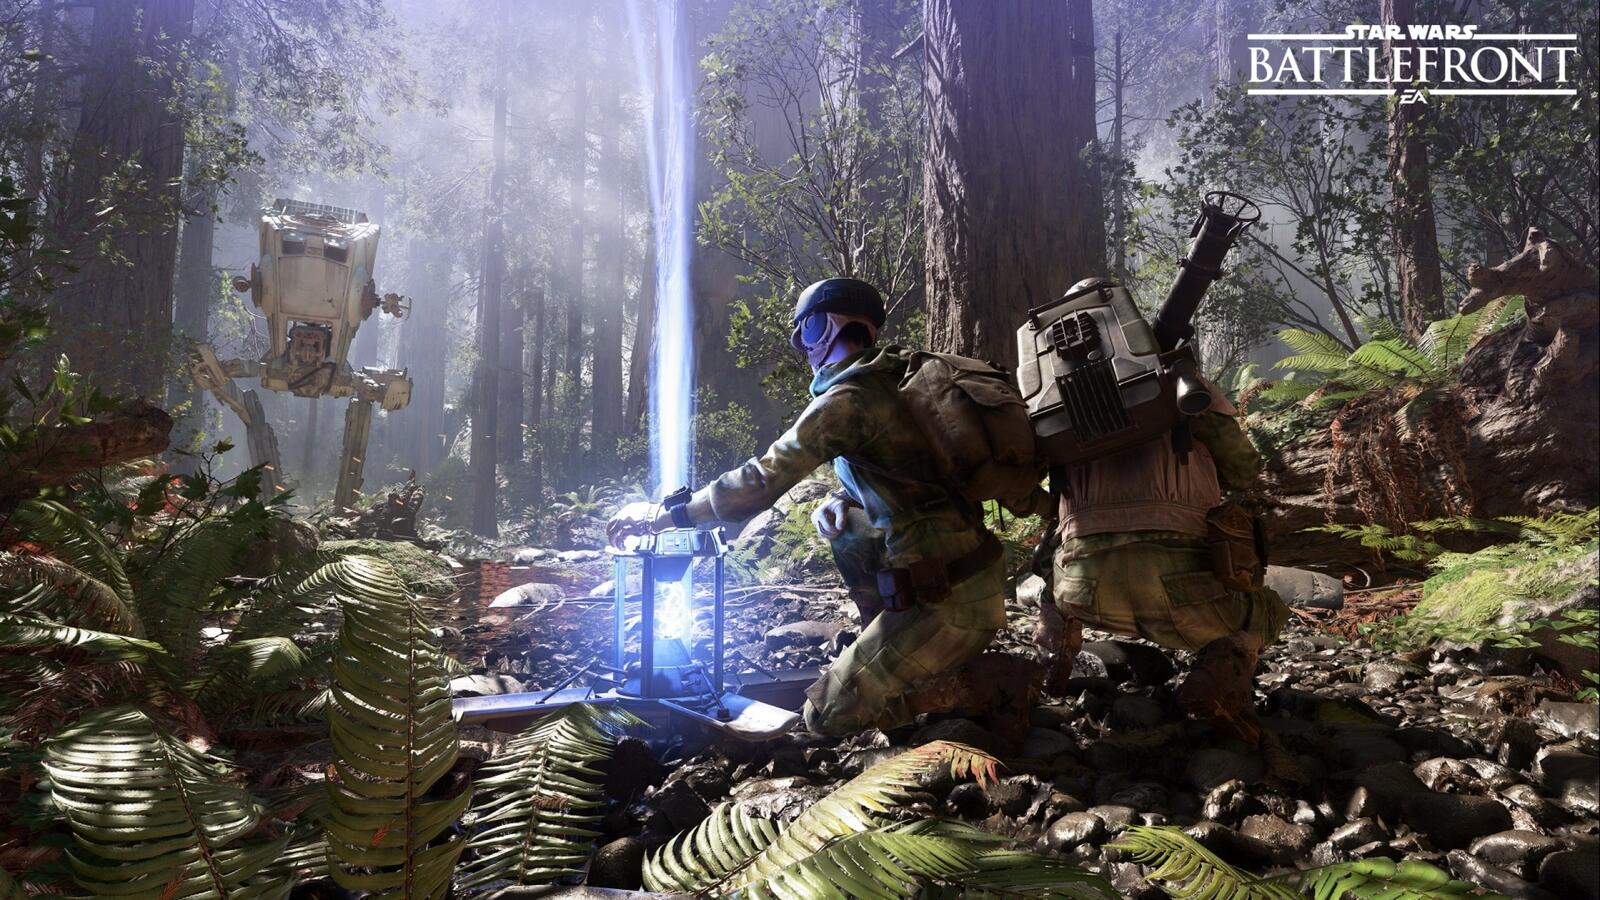 Wallpapers forest soldiers star wars battlefront ii on the desktop